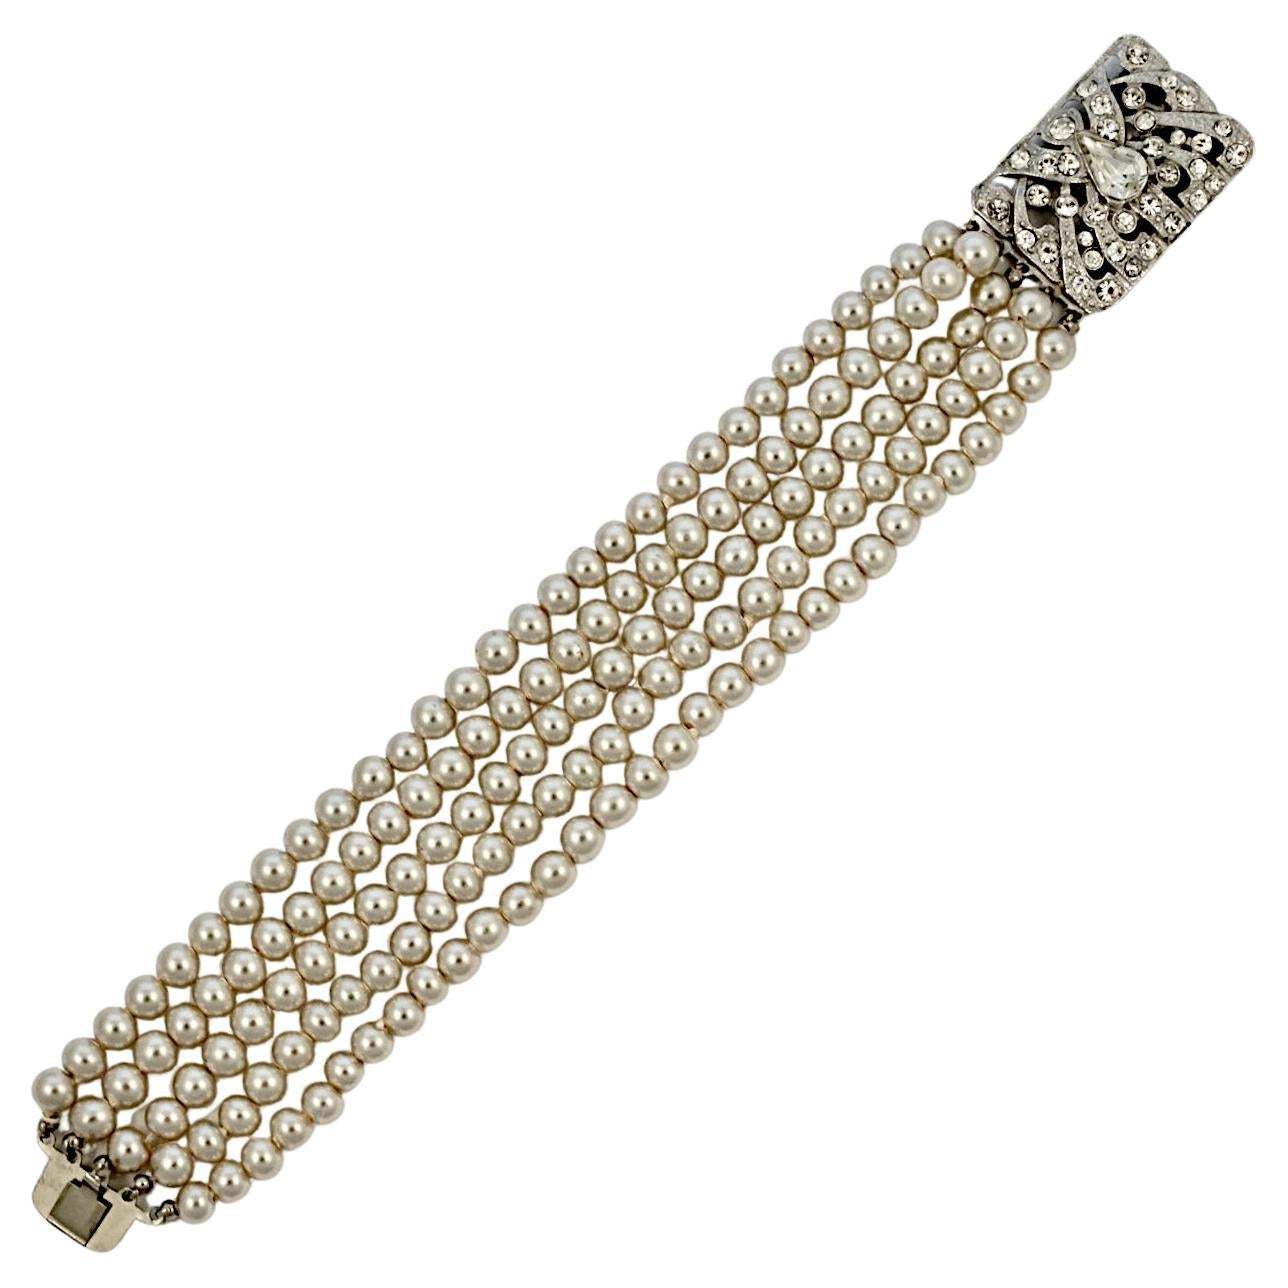 Five Strand Faux Pearl Bracelet with a Rhinestone Silver Tone Clasp